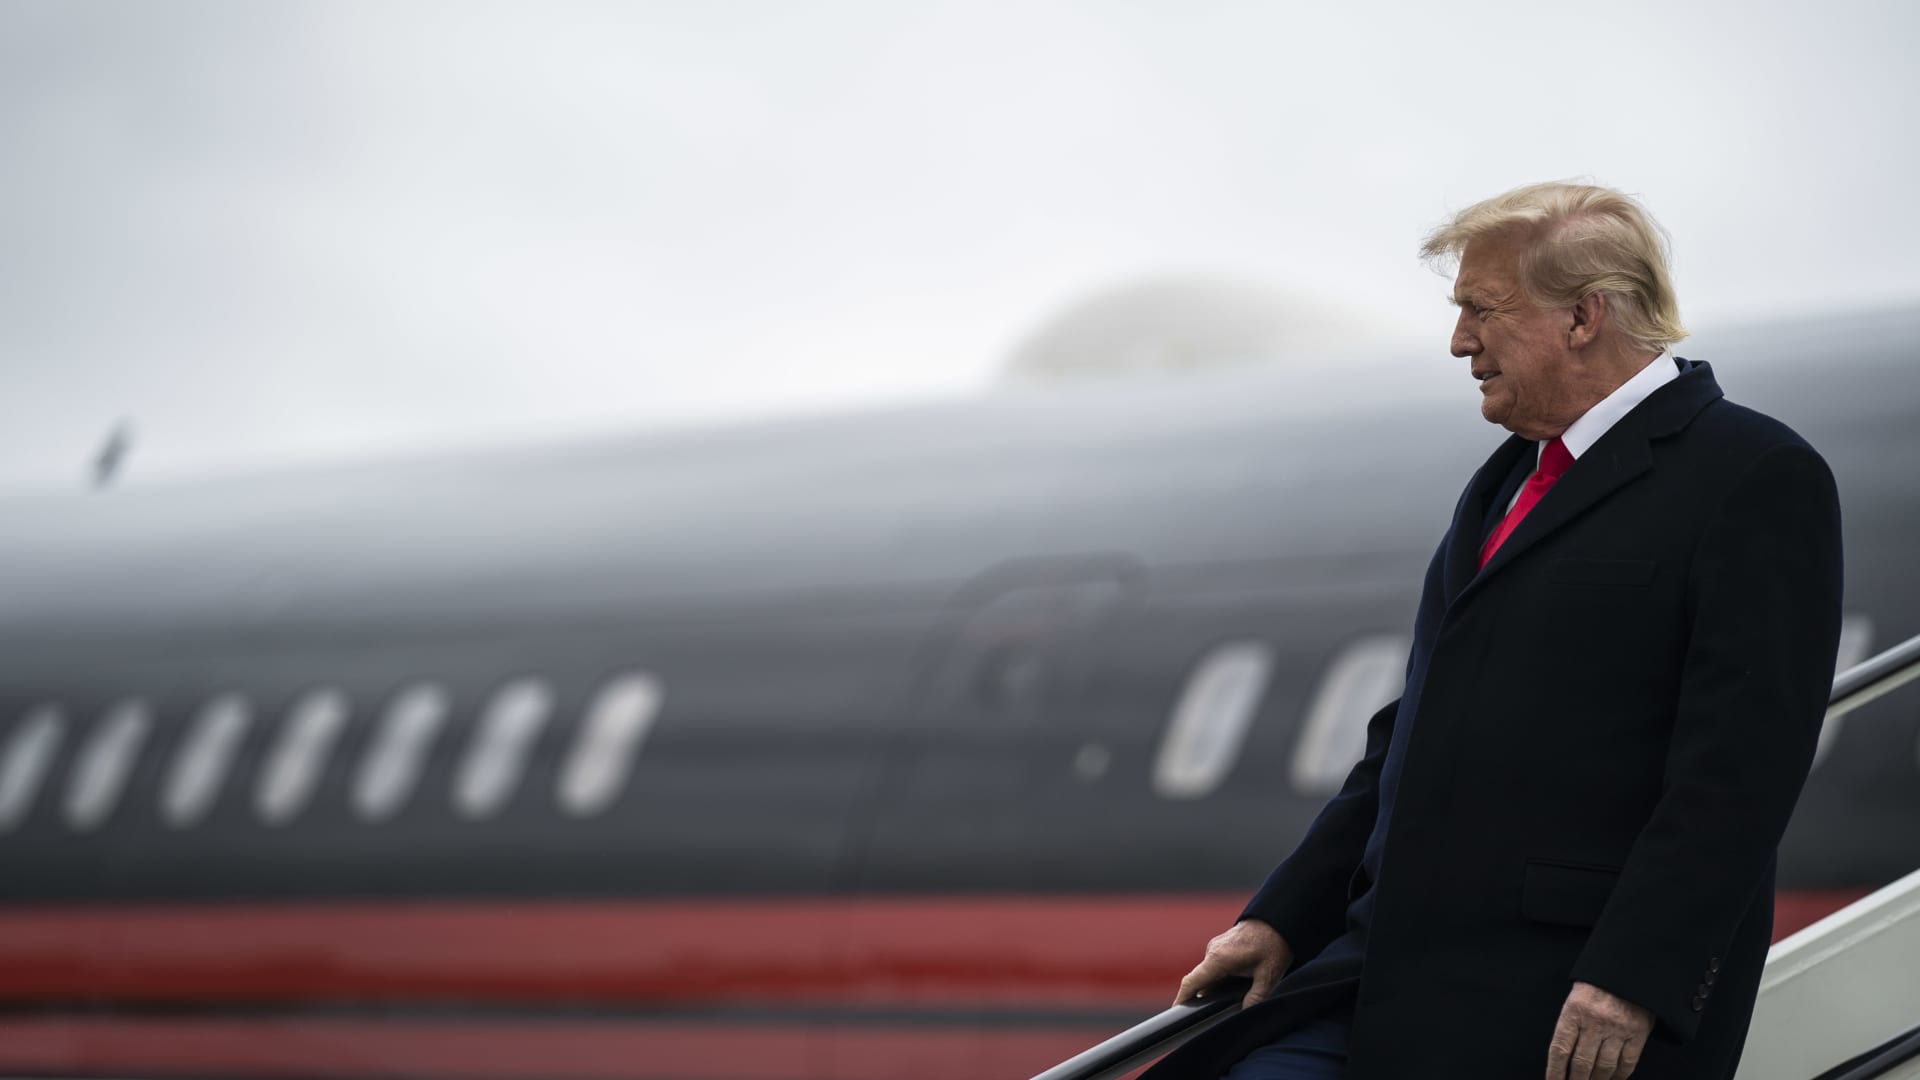 Former President Donald Trump disembarks his plane as he lands at Quad City International Airport in route to Iowa on Monday, March 13, 2023, in Moline, IL.